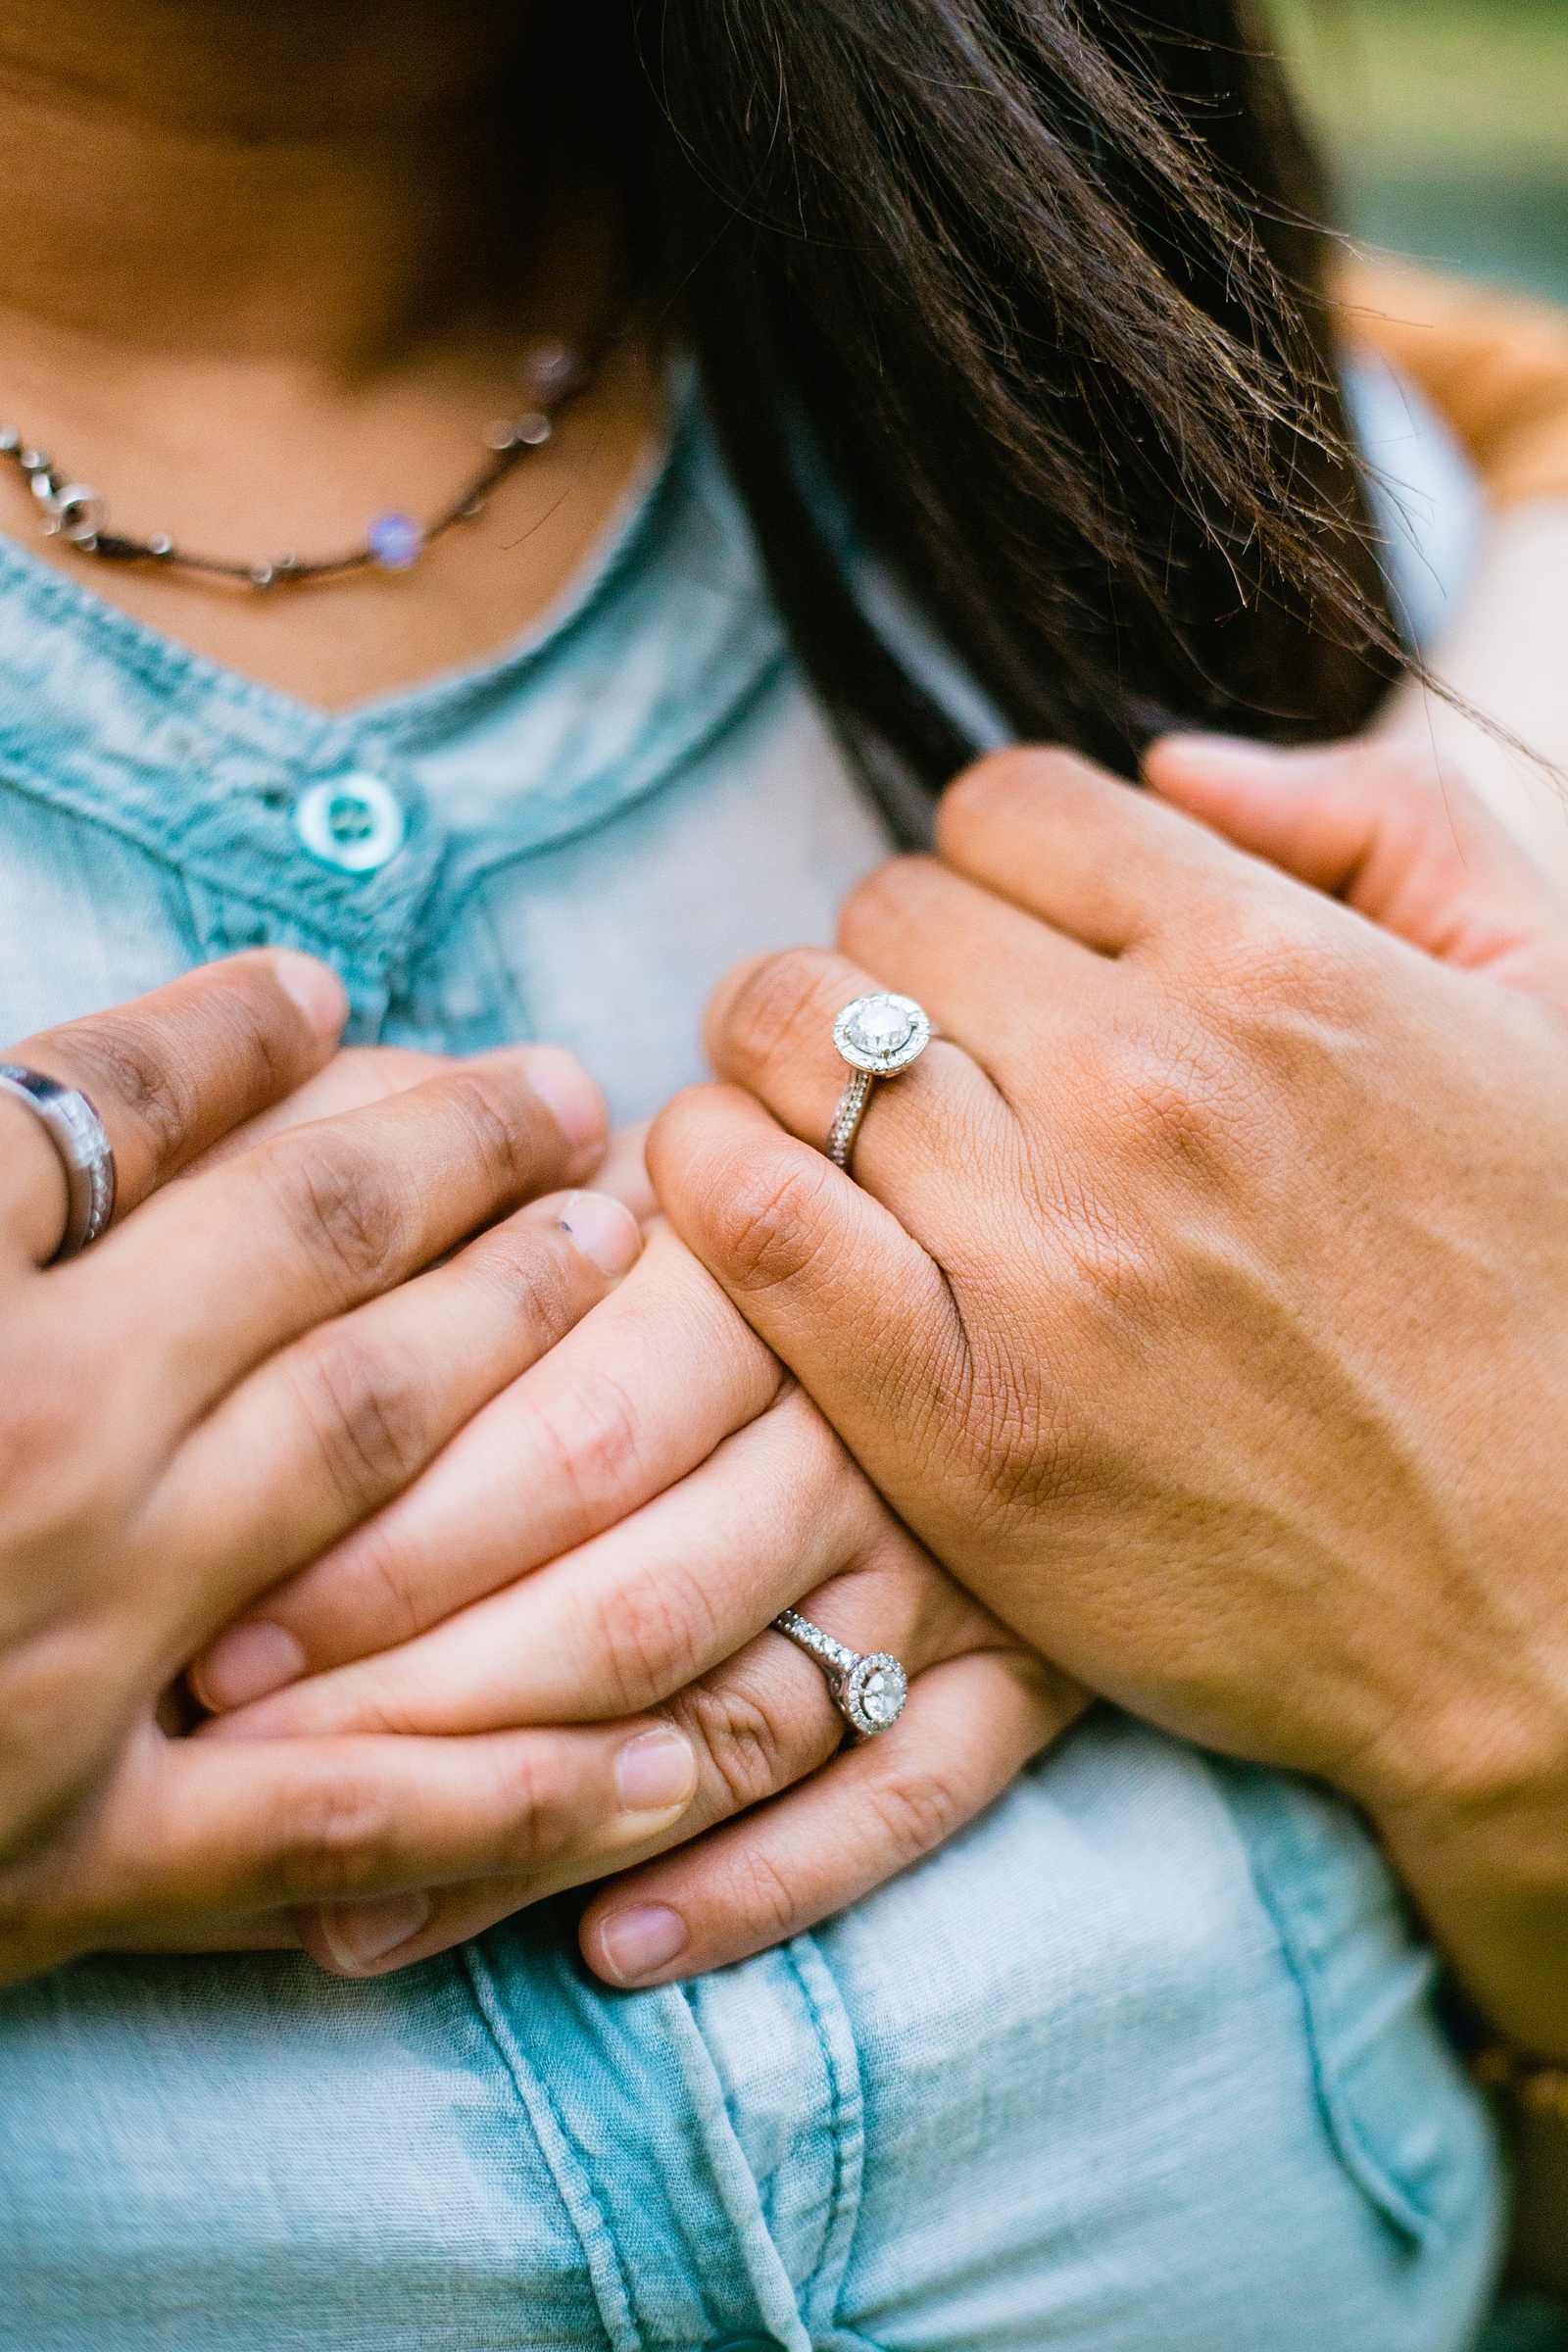 Detail image of engagement rings during during engagement session by PMA Photography.